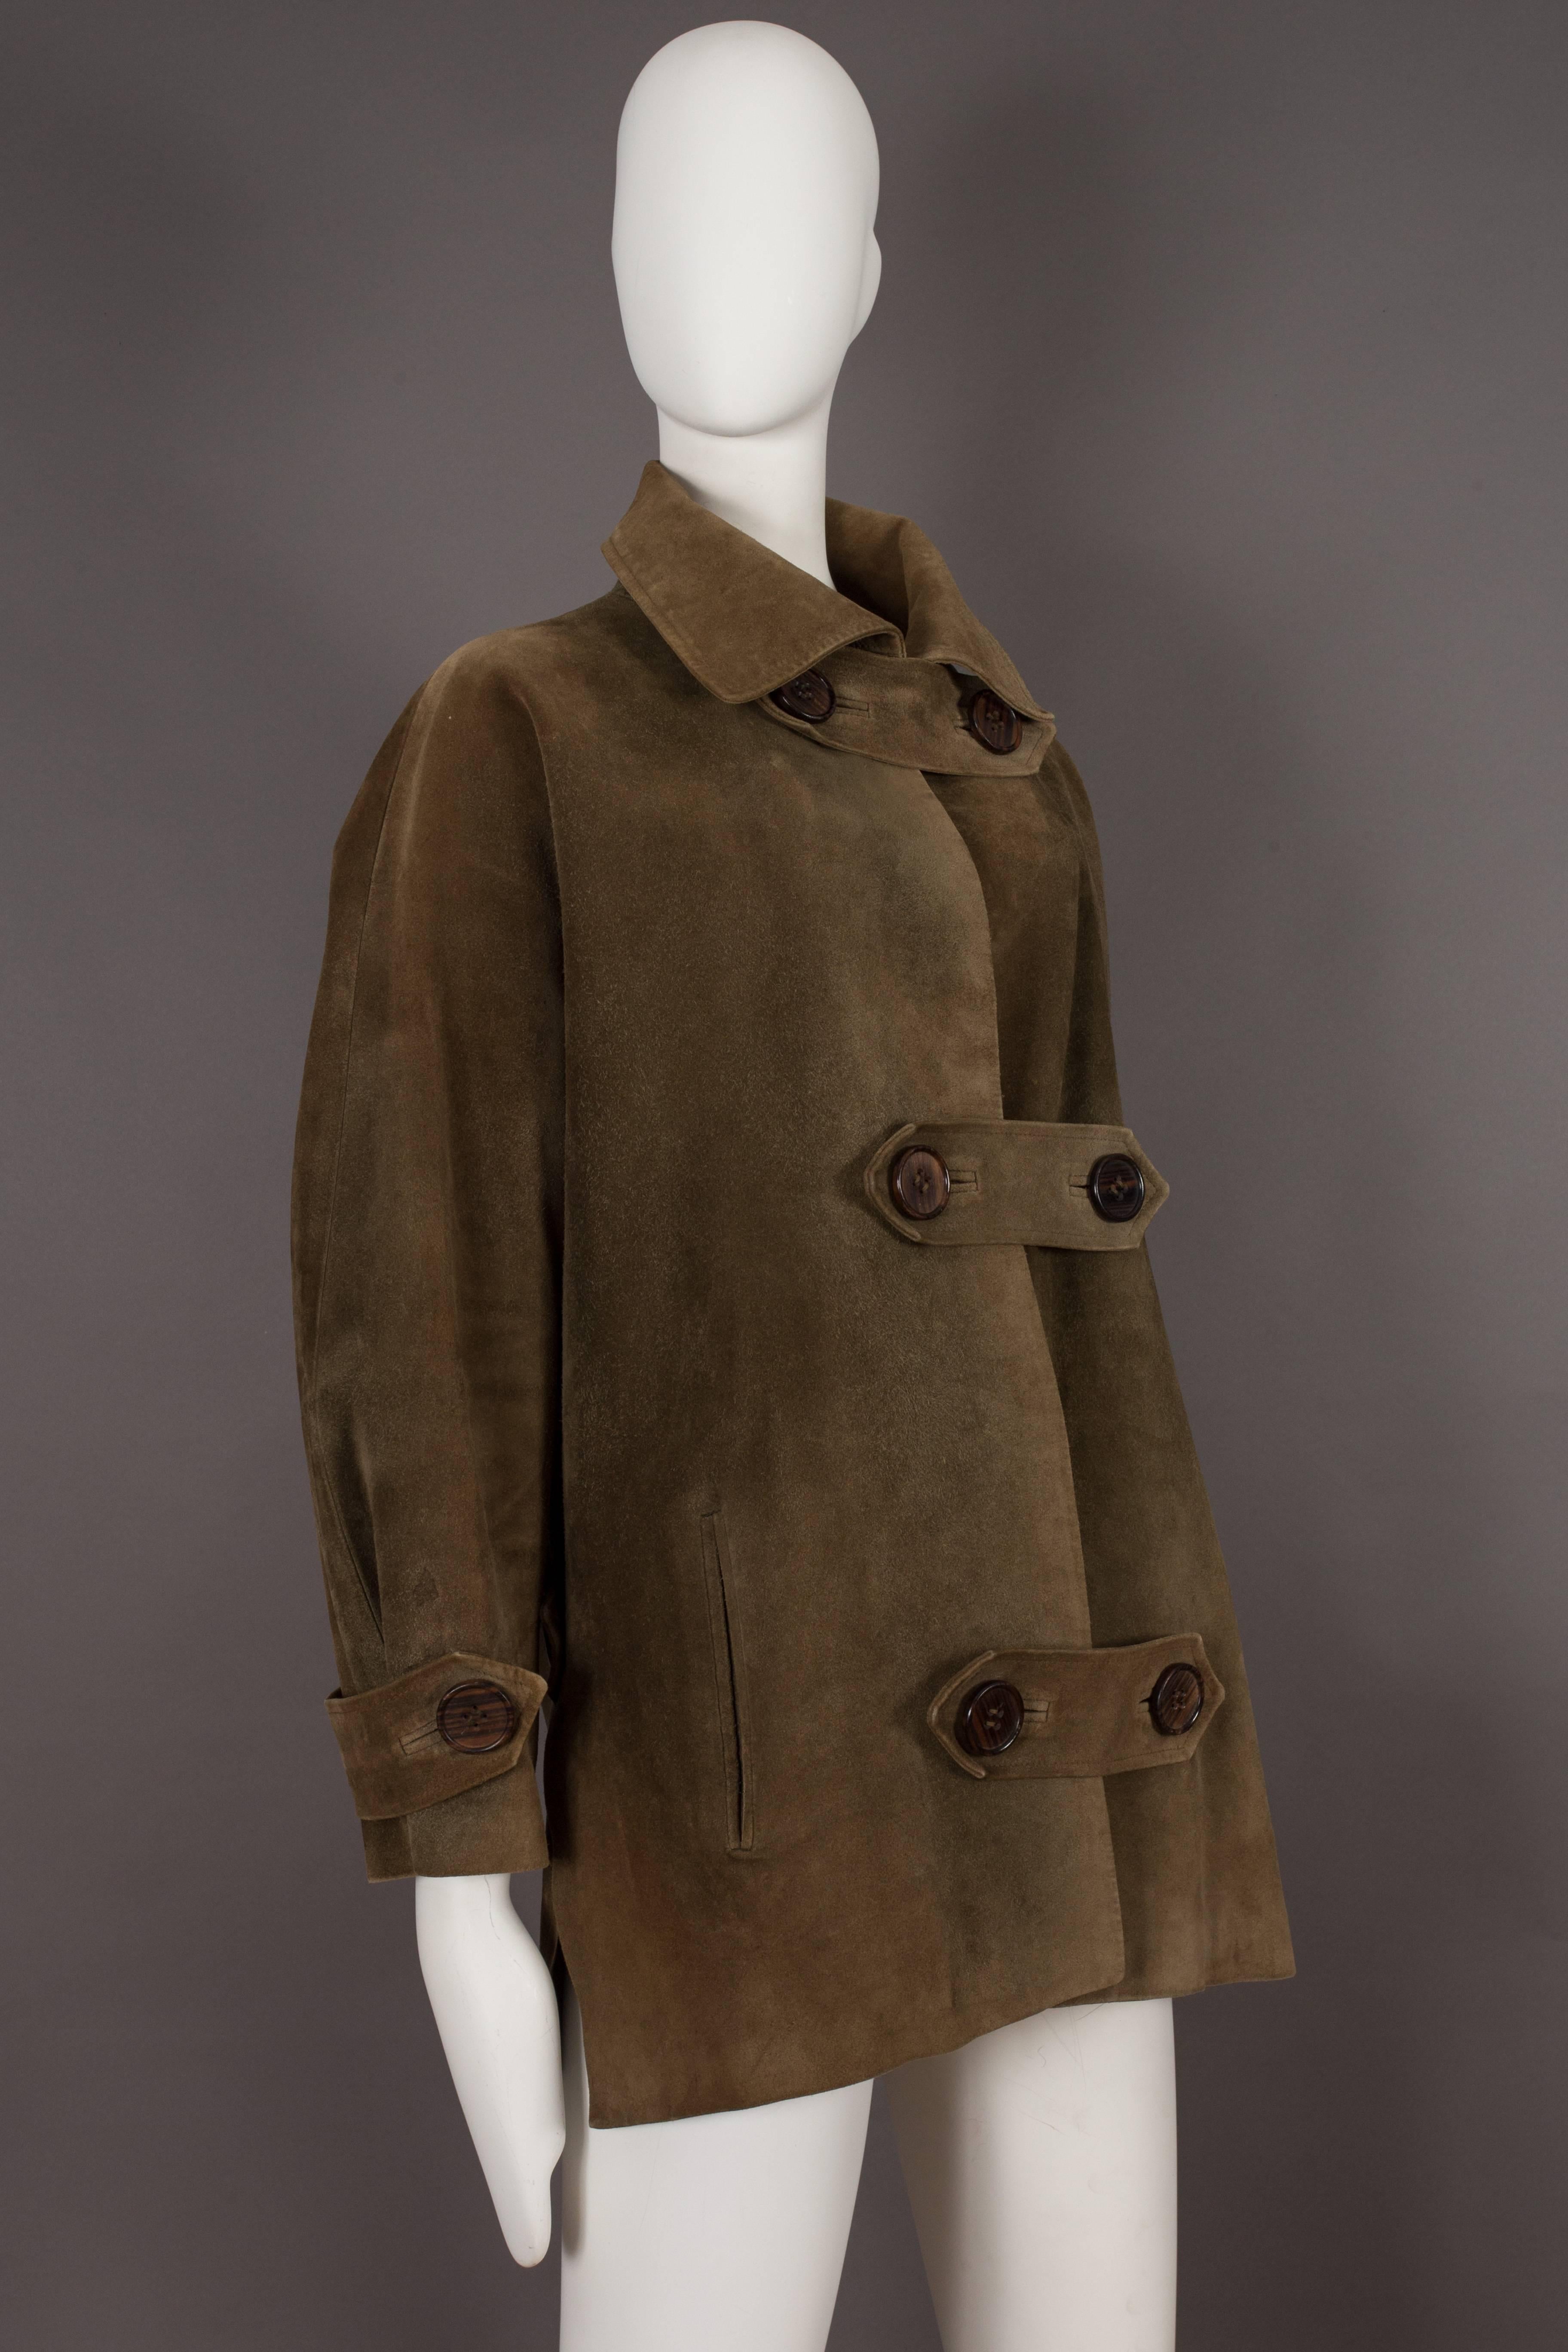 Extremely rare and important haute couture Yves Saint Laurent oversized suede coat from the autumn-winter 1963-64 'Chasuble and Cuissarde Boots Collection'.

The coat features double button closures made of wood throughout and silk lining. 